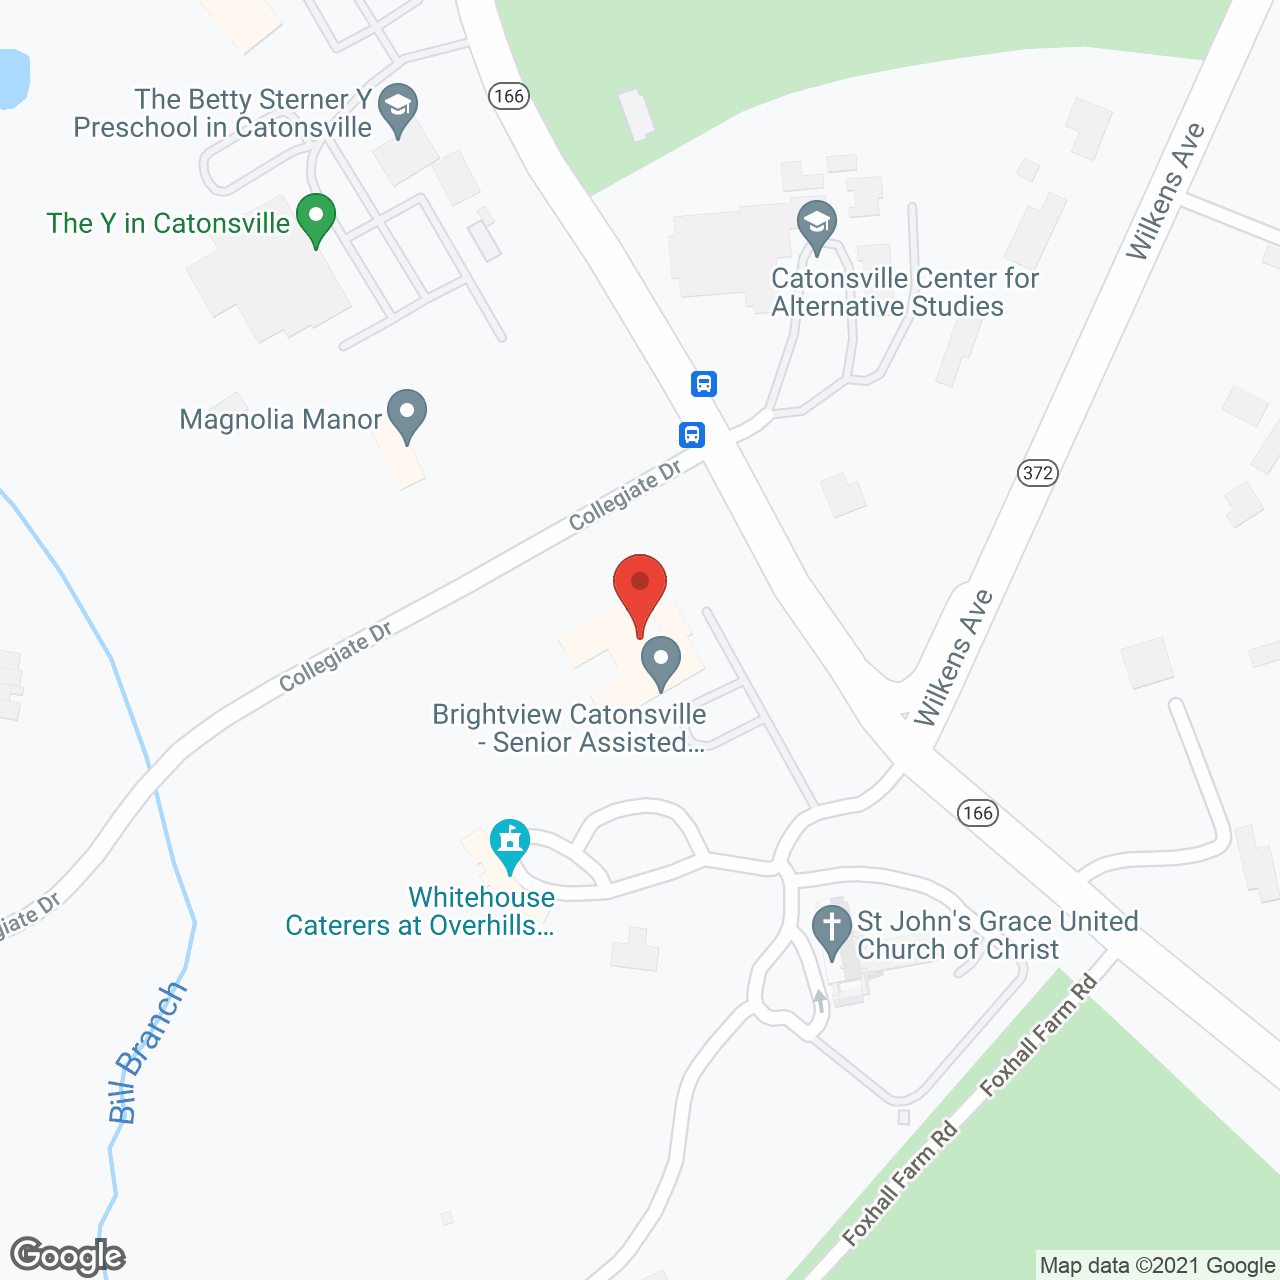 Brightview Catonsville in google map